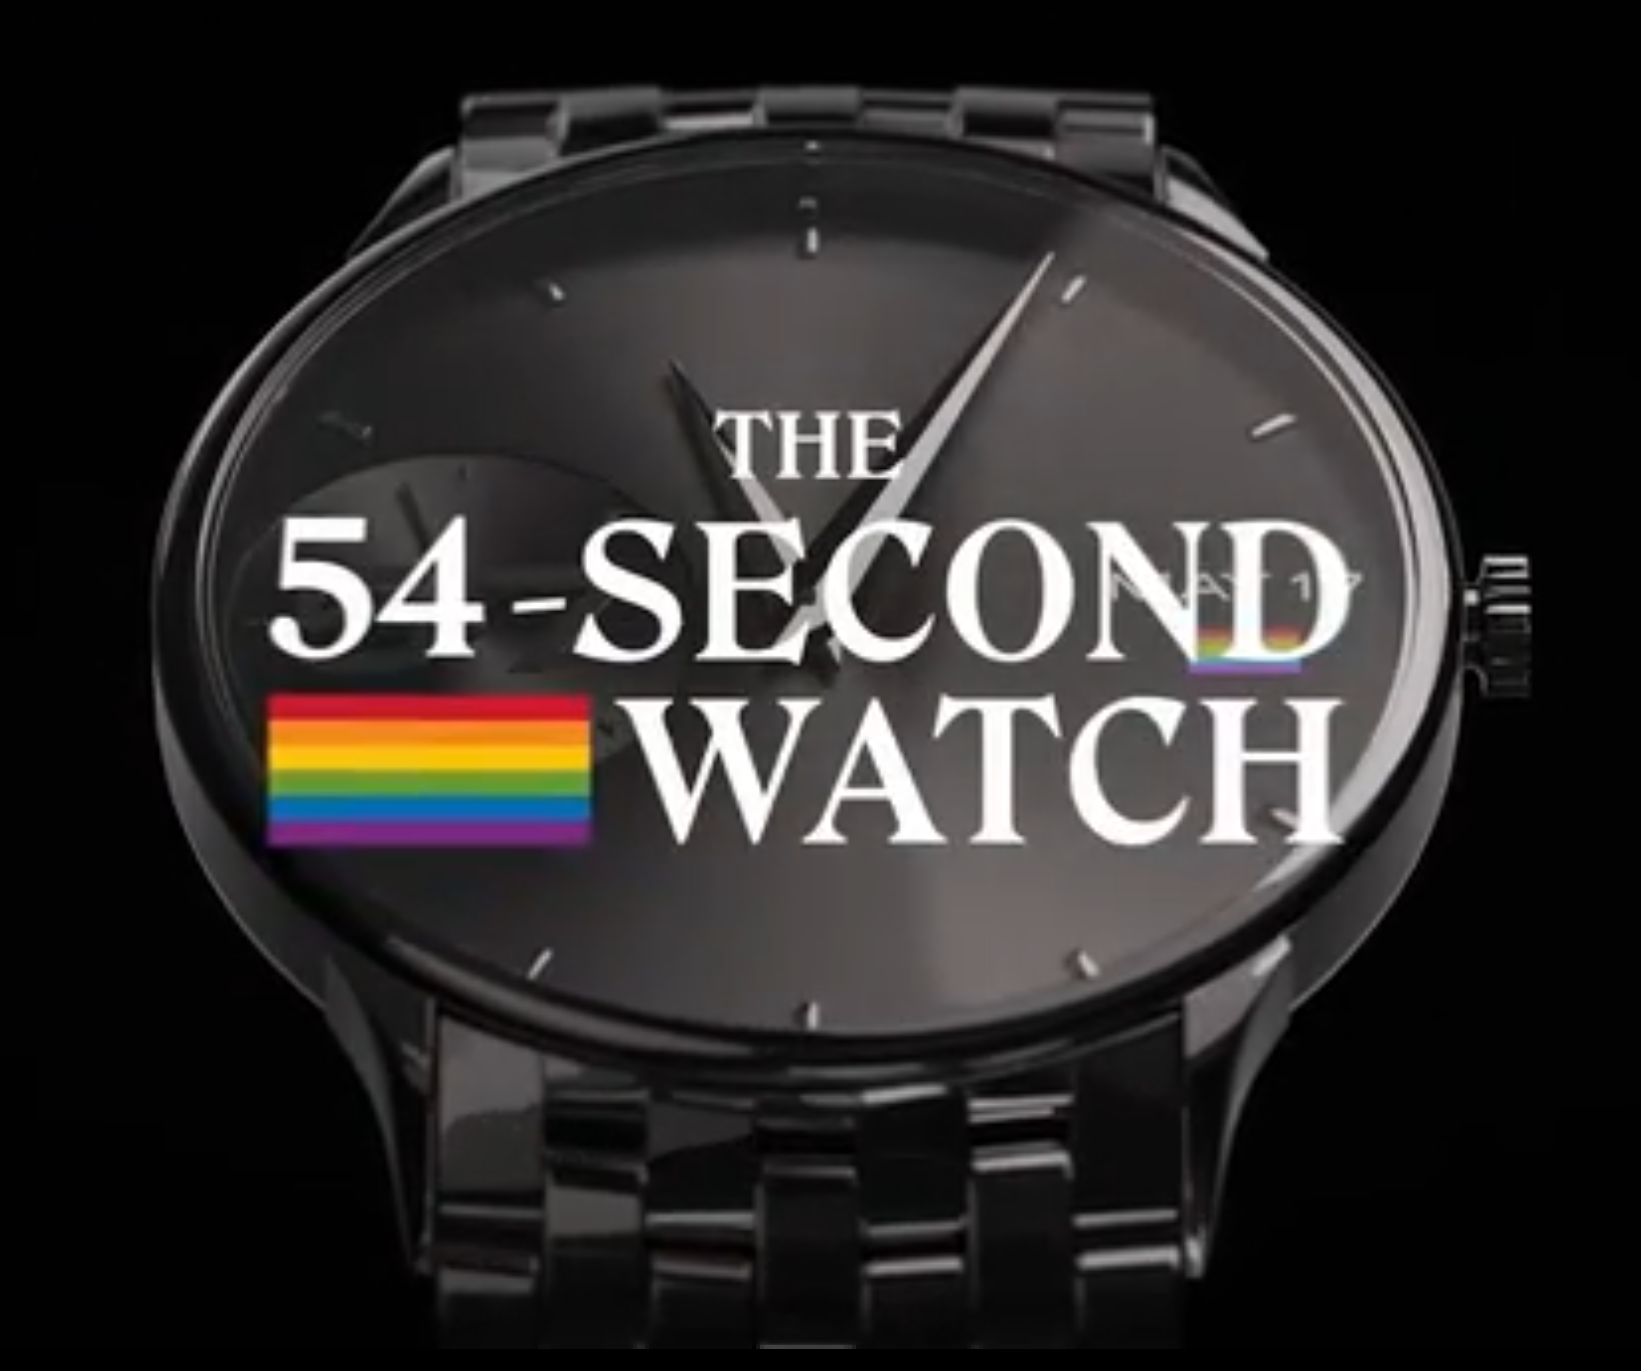 The 54-second watch